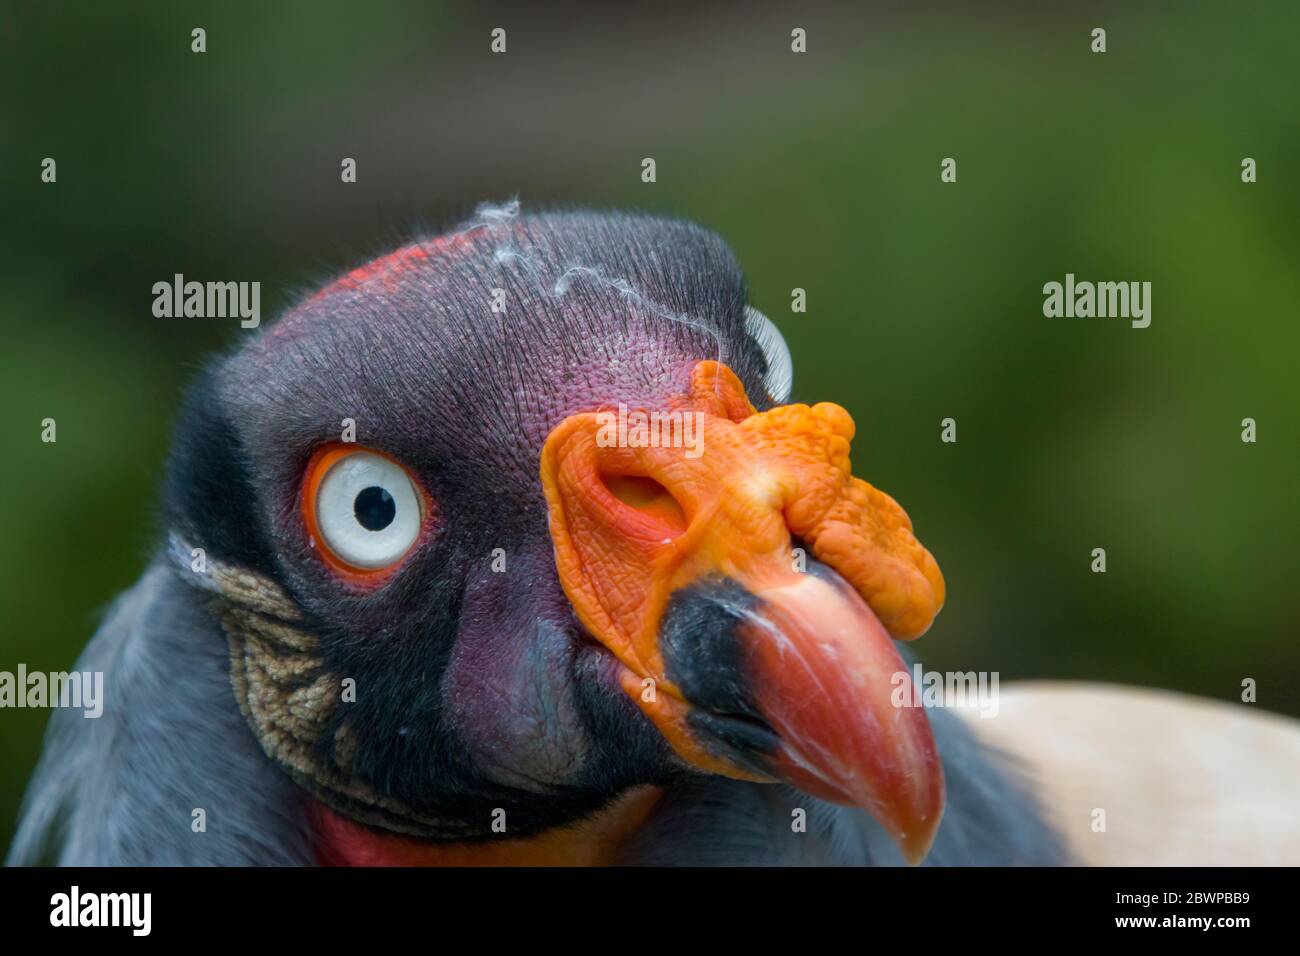 The King vulture is a large bird found in Central and South America. It is a member of the New World vulture family Cathartidae. Stock Photo